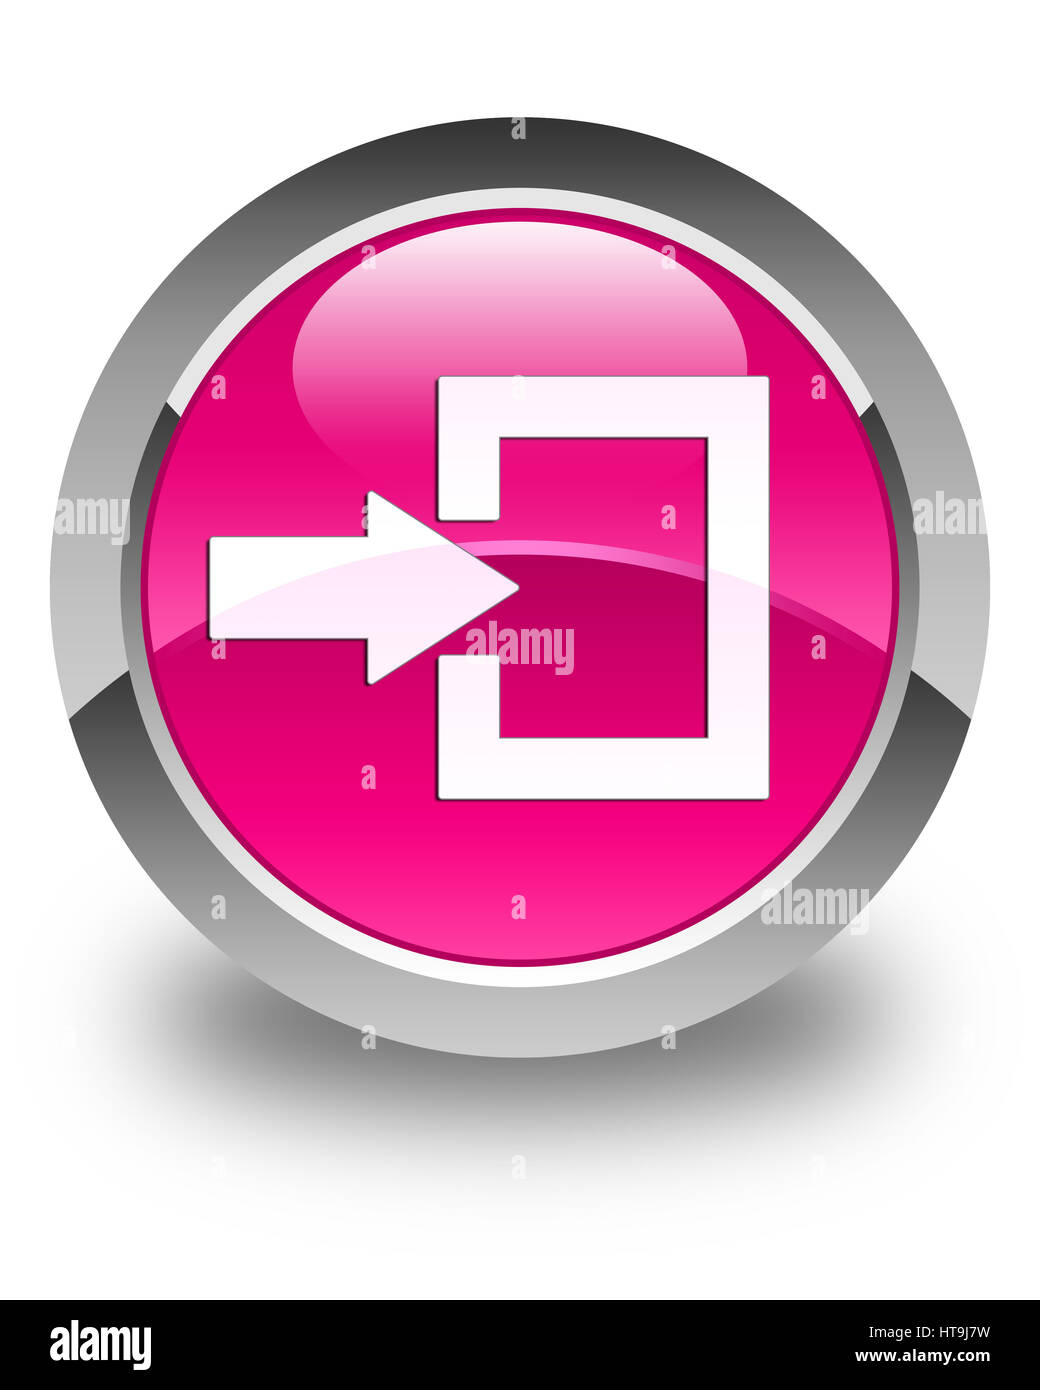 Login icon isolated on glossy pink round button abstract illustration Stock Photo